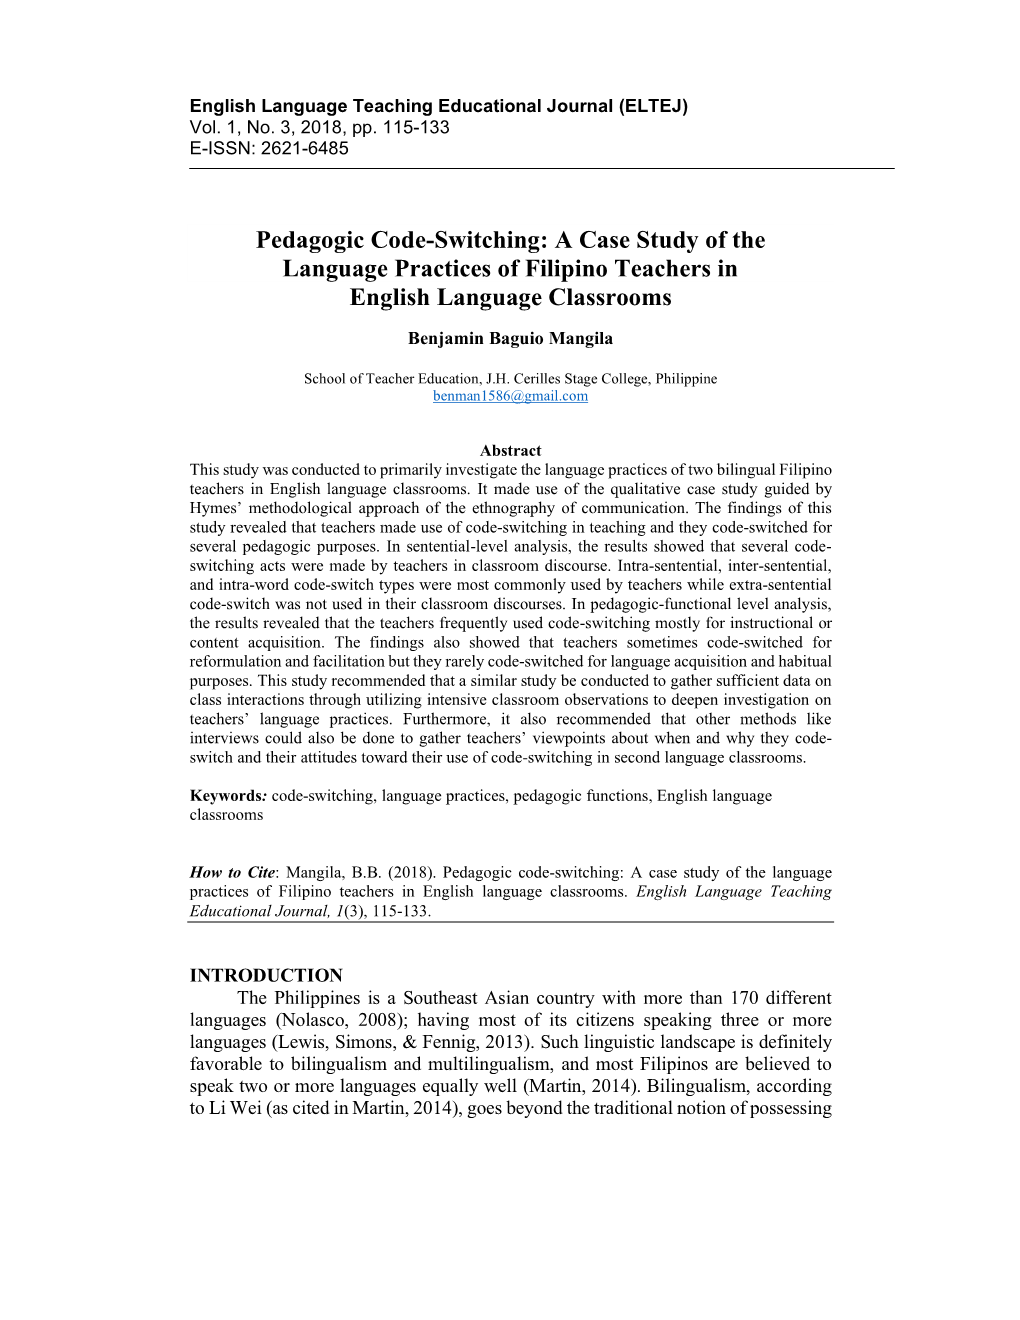 Pedagogic Code-Switching: a Case Study of the Language Practices of Filipino Teachers in English Language Classrooms